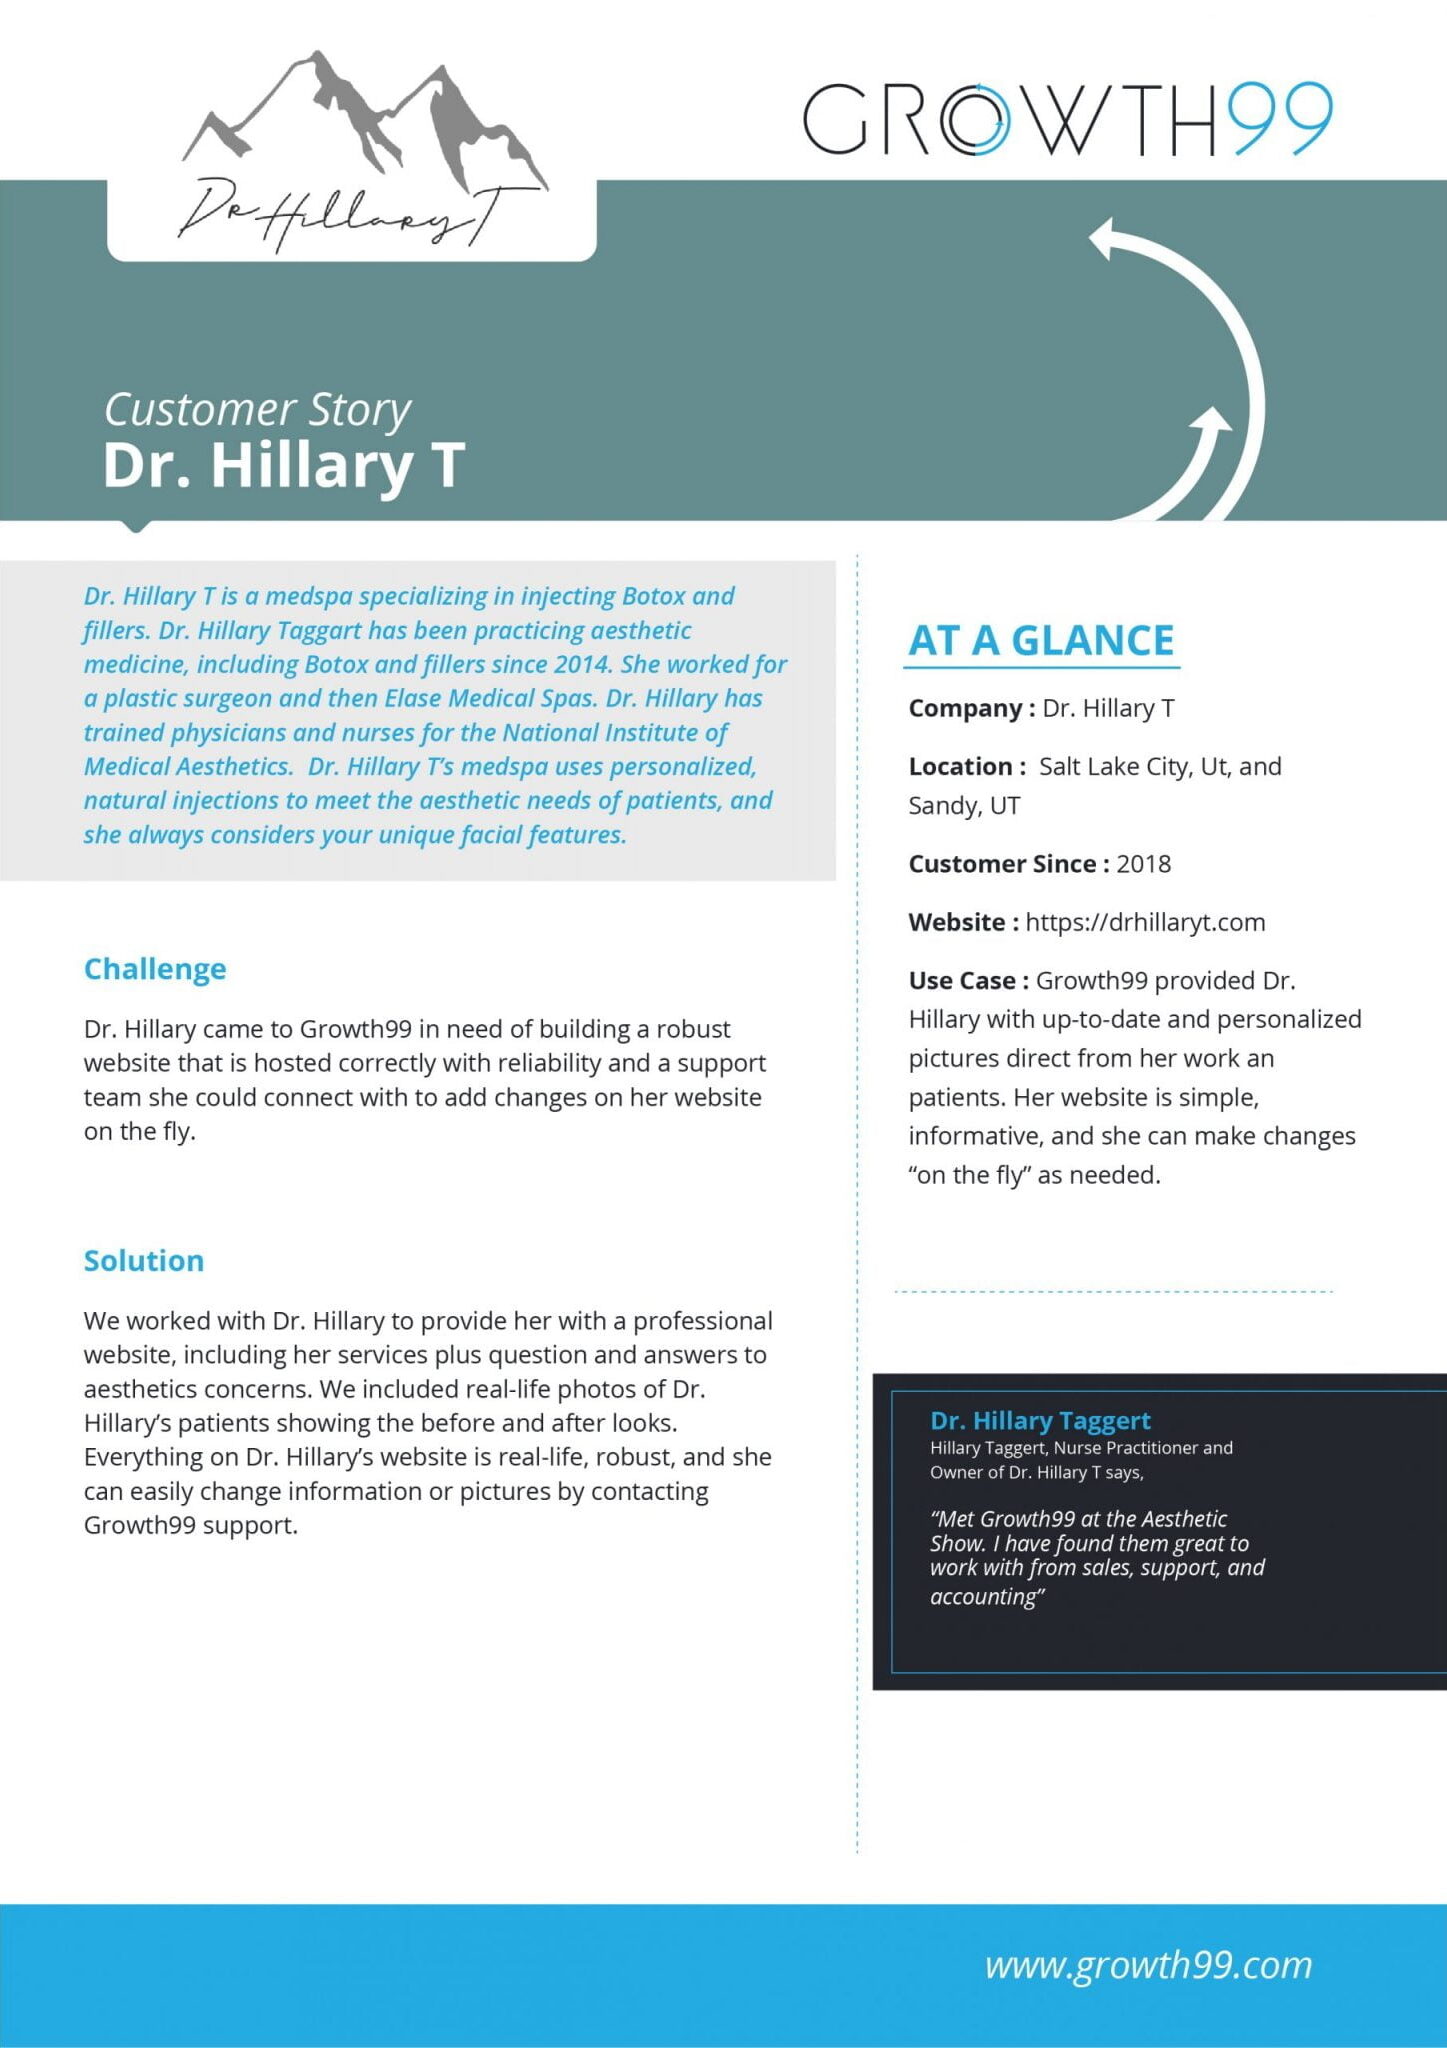 Dr. Hillary T Case Study